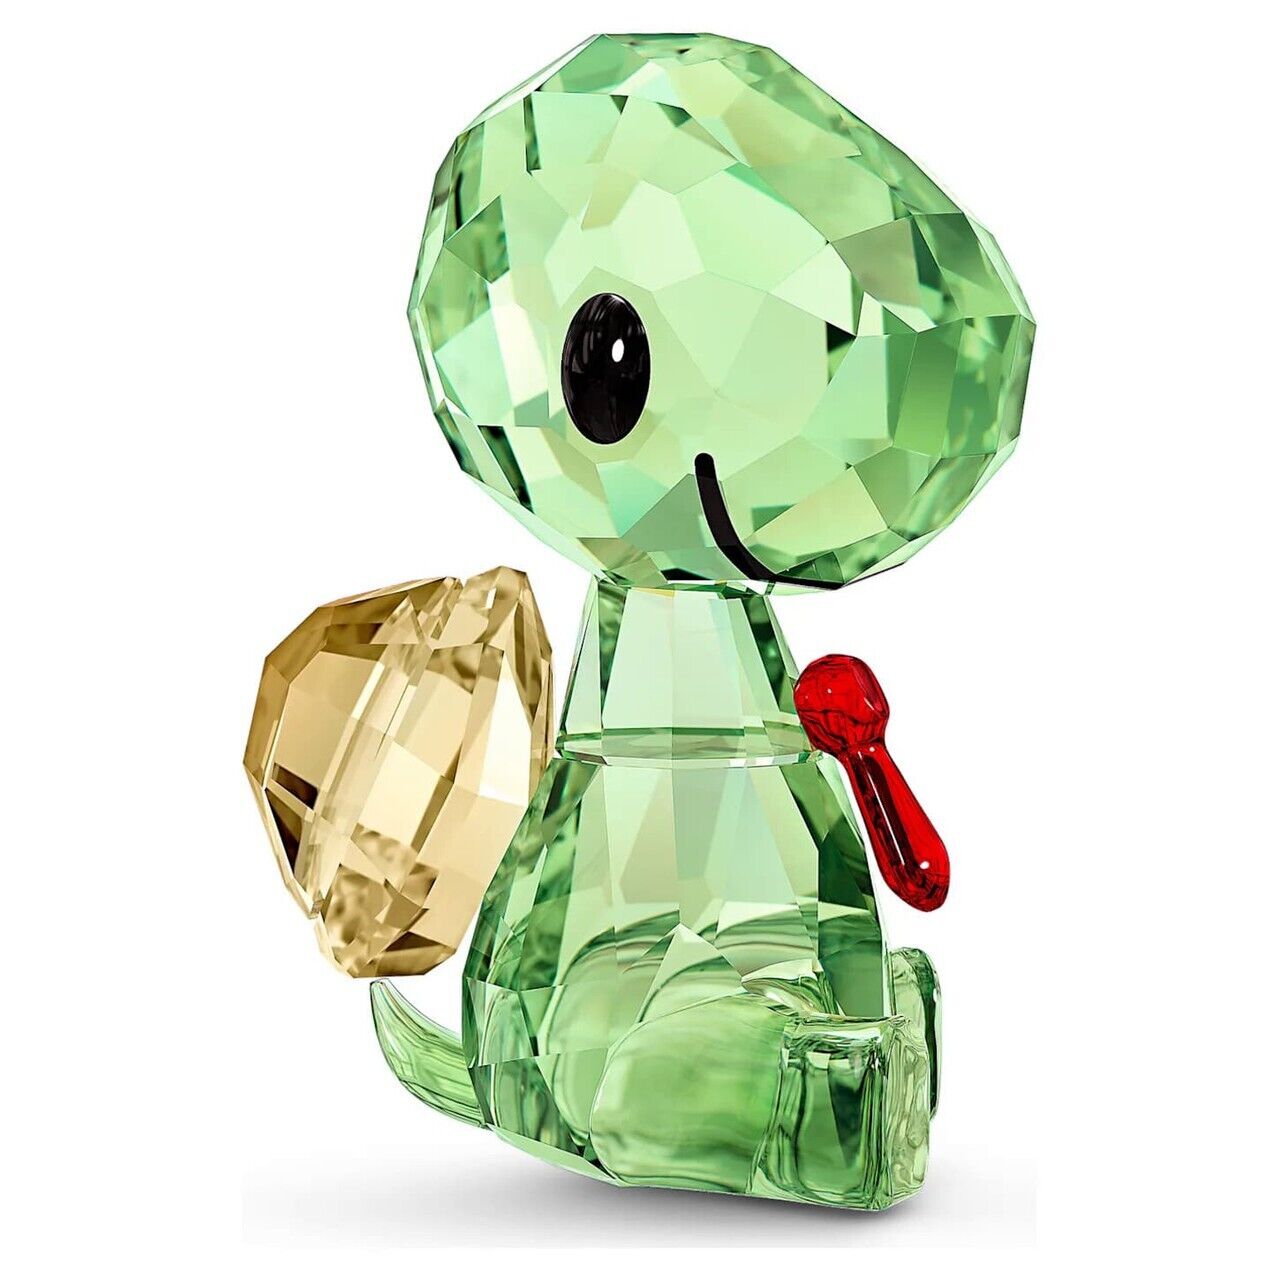 Swarovski Crystal Baby Animals Shelly the Turtle 5506809 New in Box Authentic